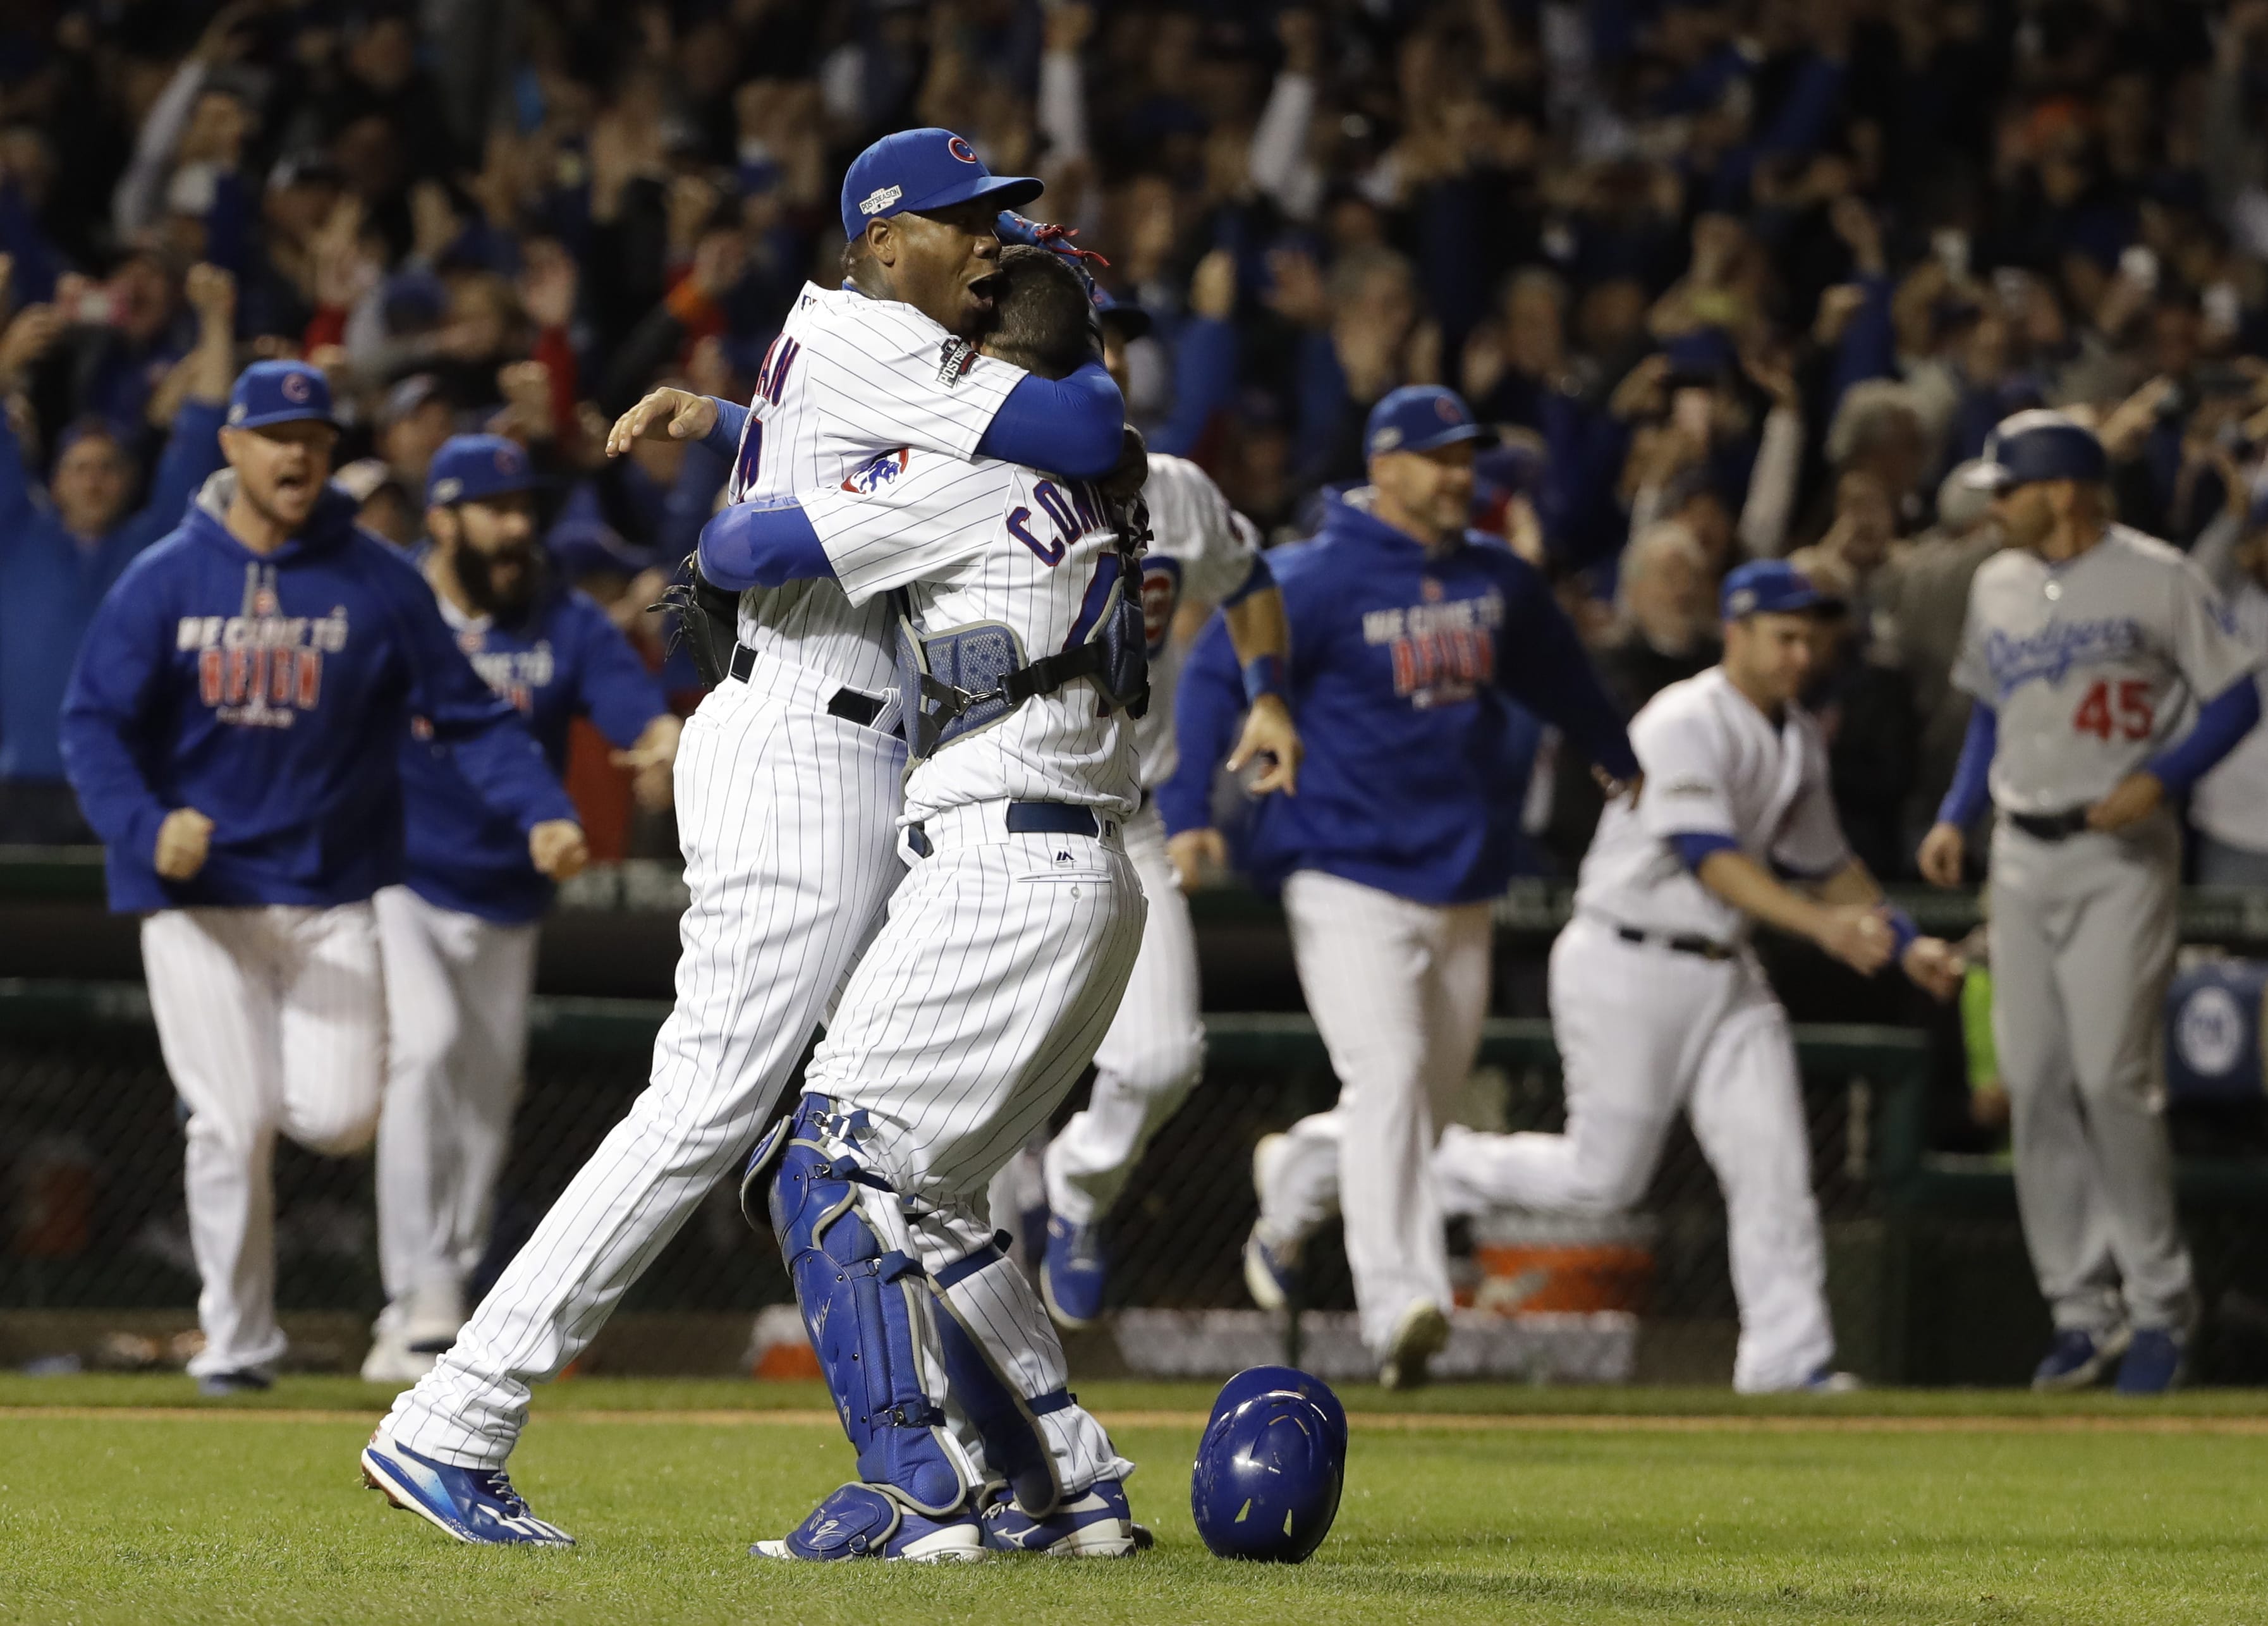 Chicago Cubs catcher Willson Contreras and relief pitcher Aroldis Chapman (54) celebrate after Game 6 of the National League baseball championship series against the Los Angeles Dodgers Saturday, Oct. 22, 2016, in Chicago. The Cubs won 5-0 to win the series and advance to the World Series against the Cleveland Indians. (AP Photo/David J.